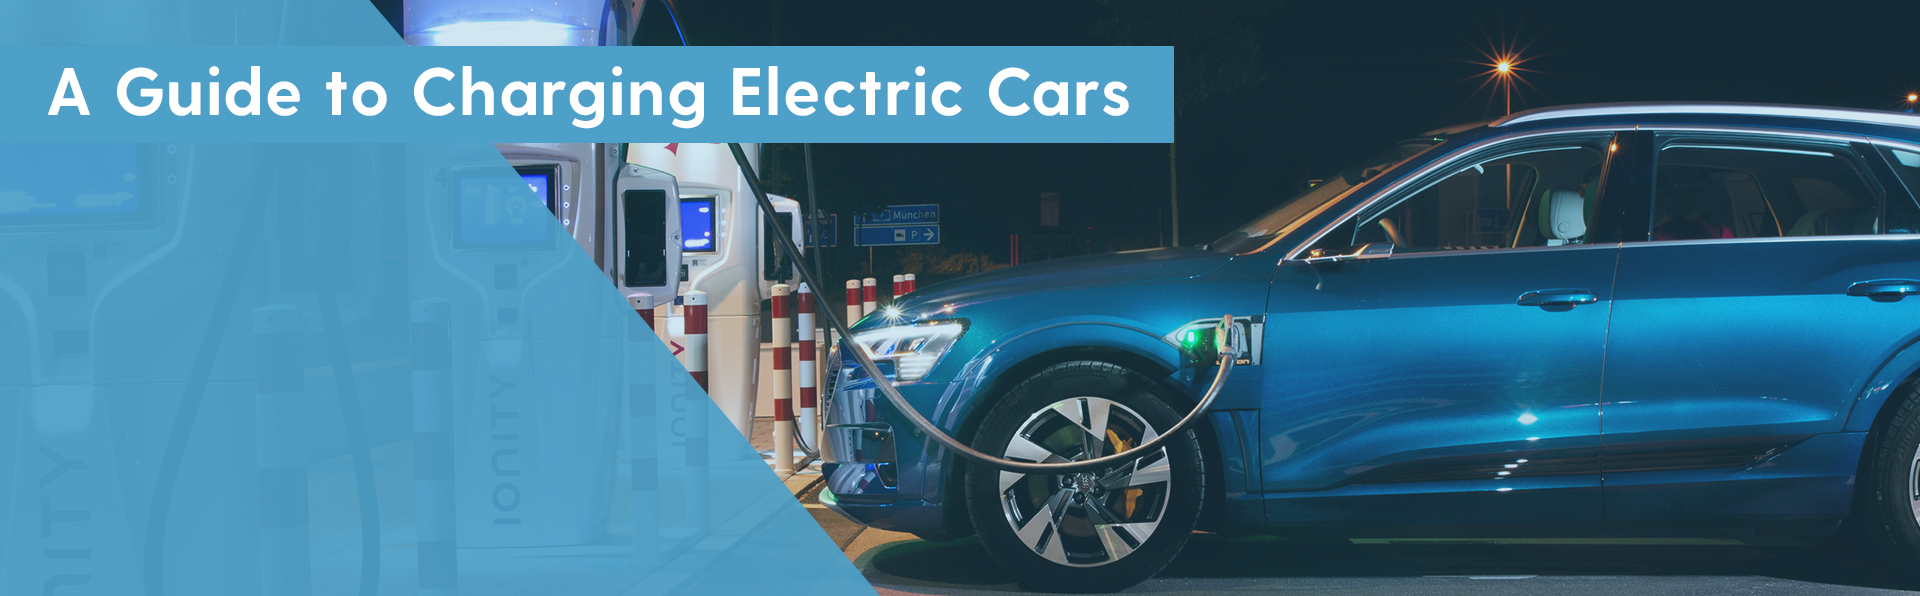 A Guide to Charging Electric Cars